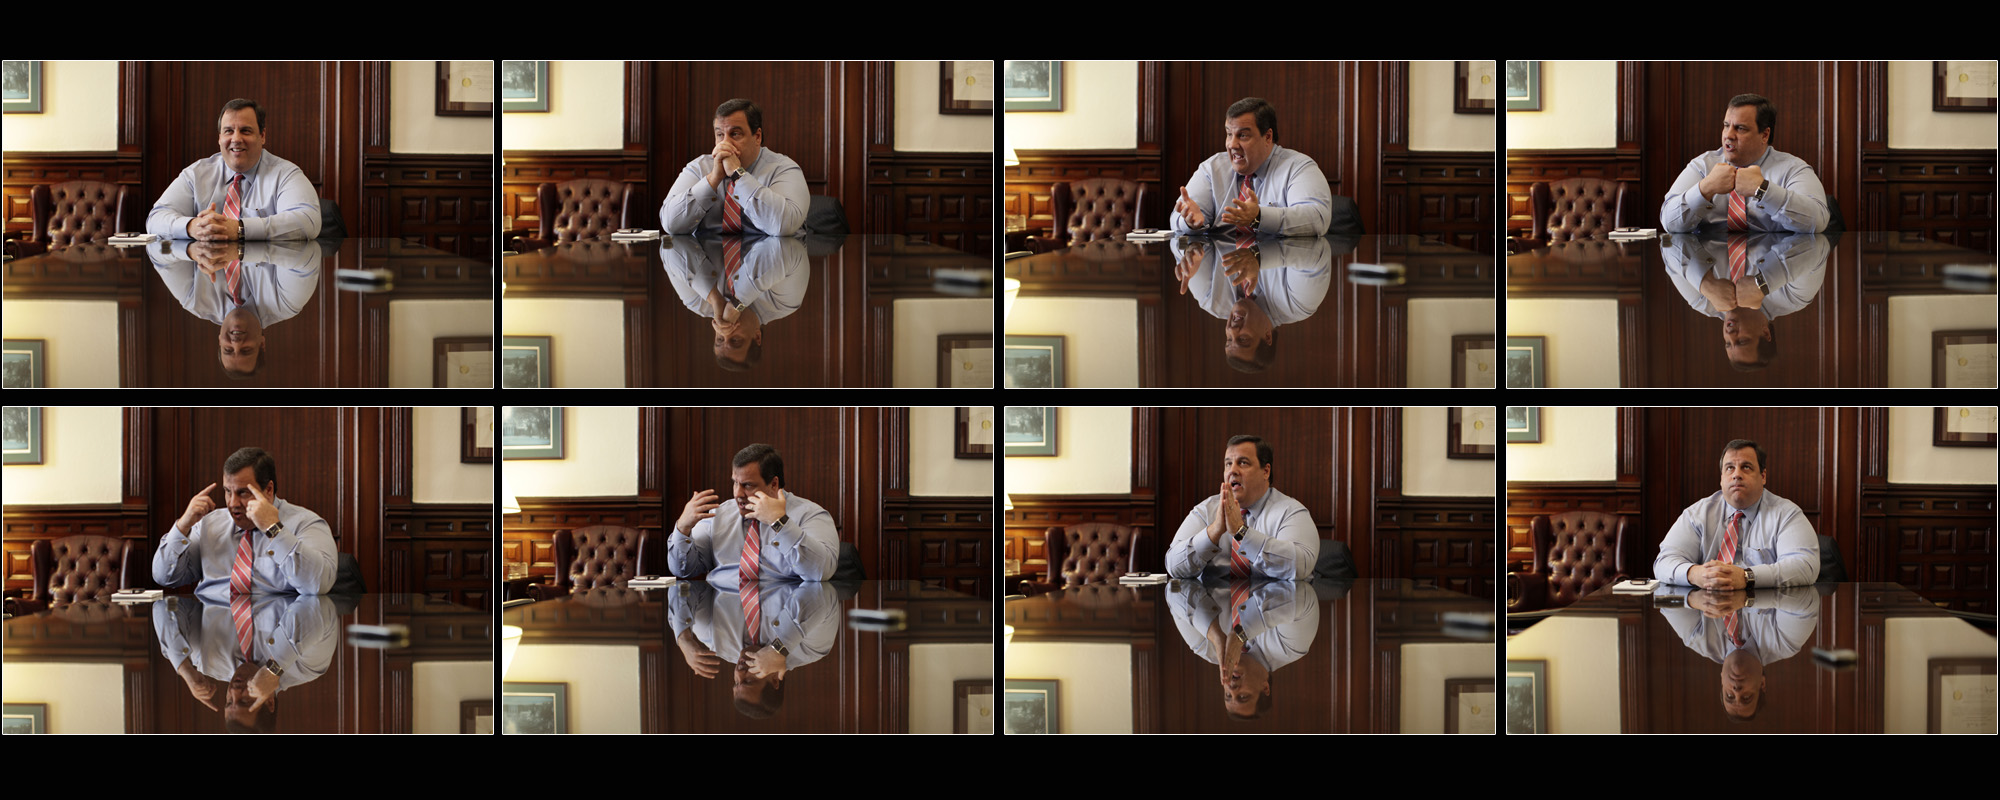 NJ Governor Chris Christie  interviewed for a story on his first 100 days in office. Photographed for The Star-Ledger